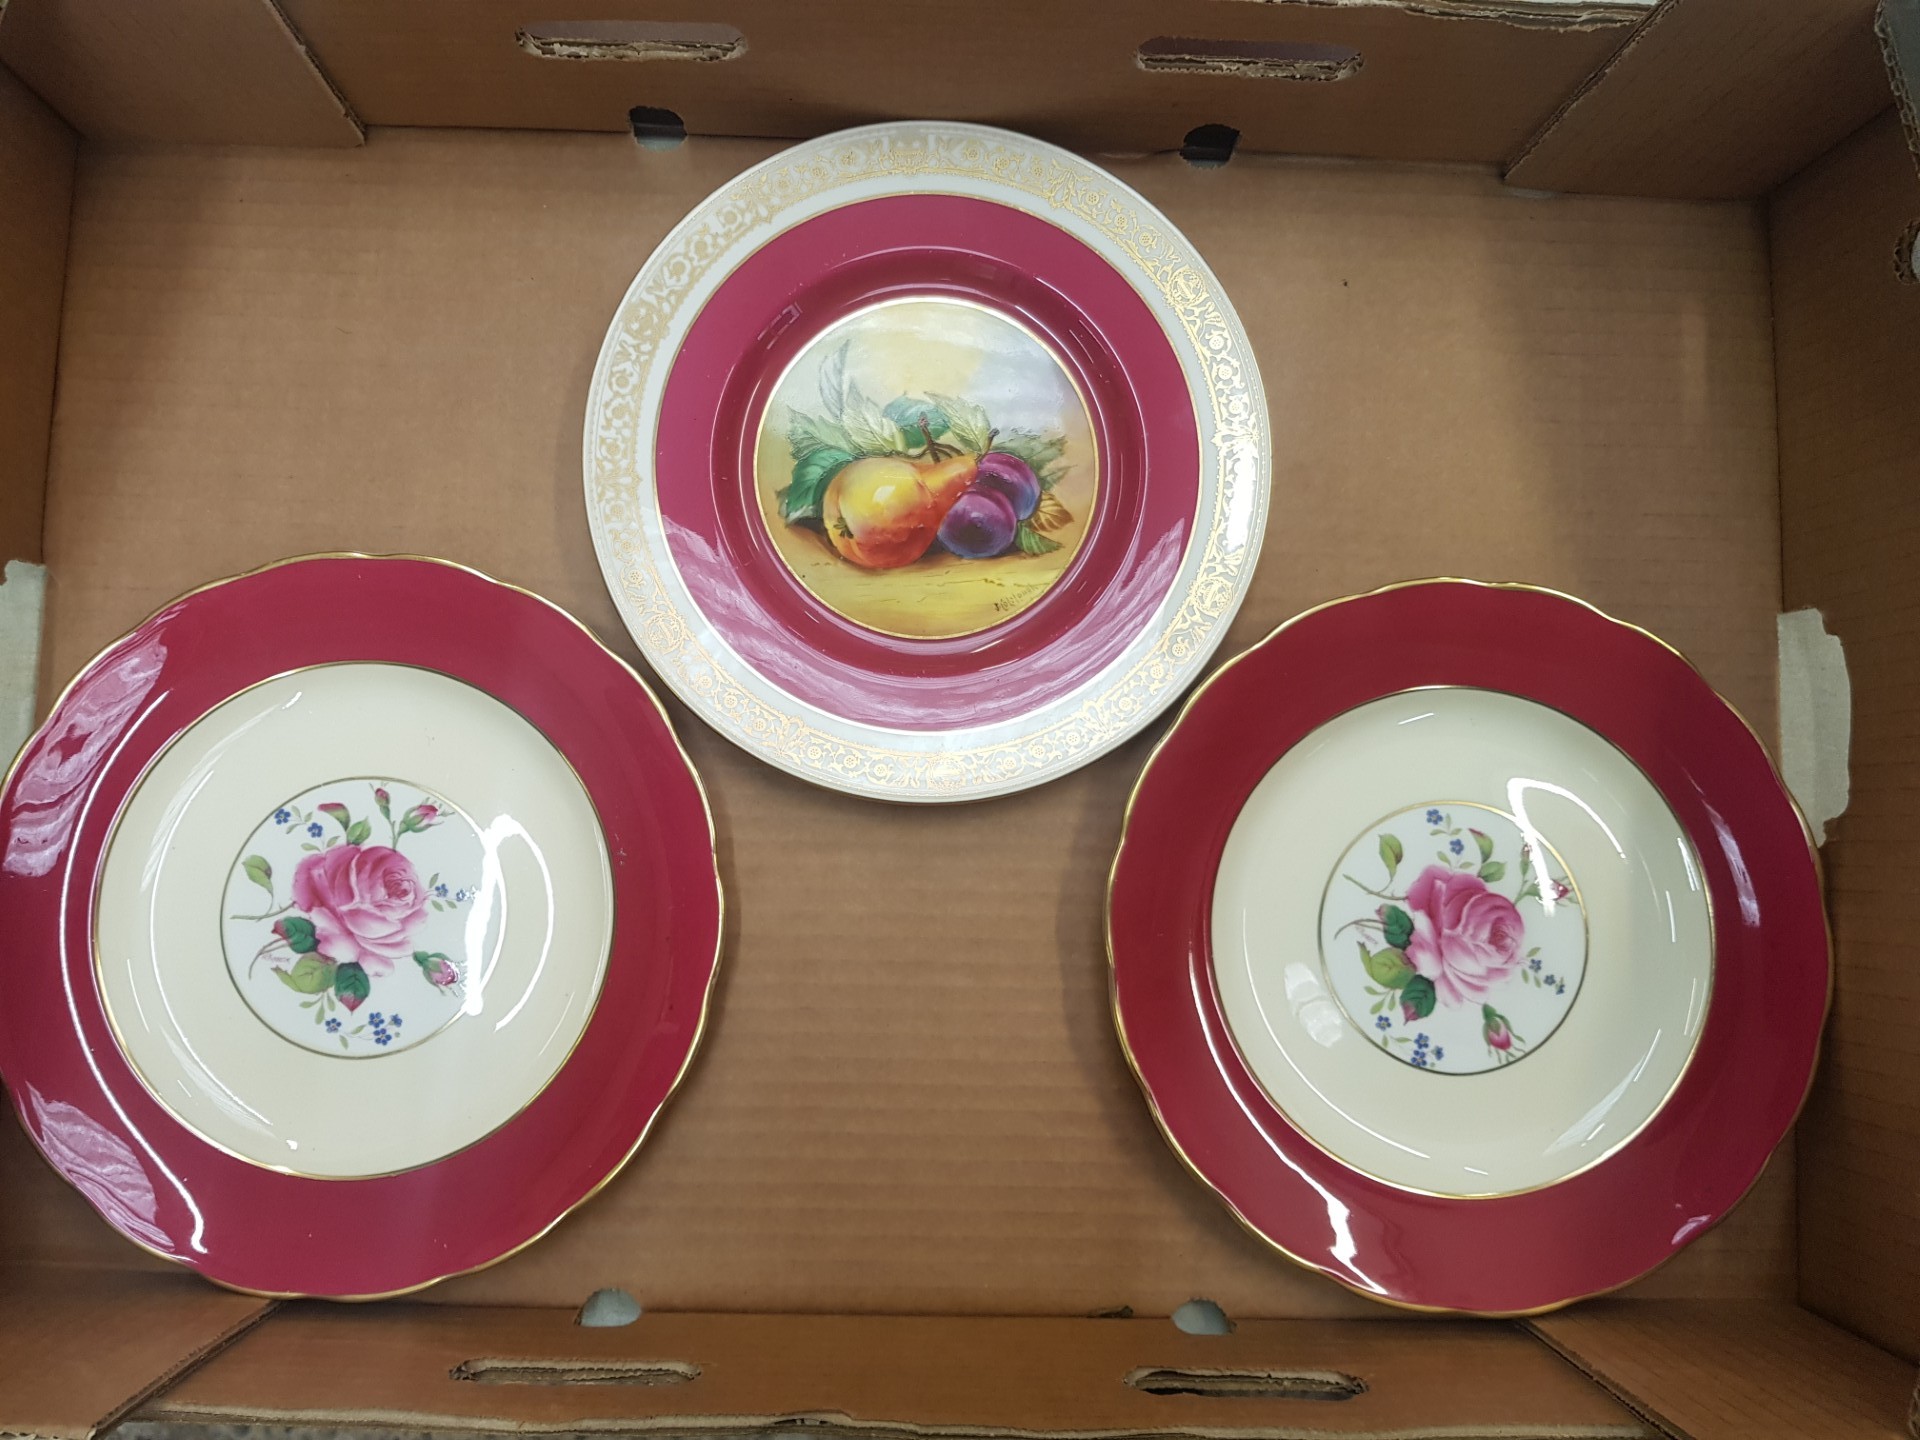 Mintons 'Mappin & Webb' Bueno Aires plate, signed J Colclough, together with 2 Coalport plates (3).